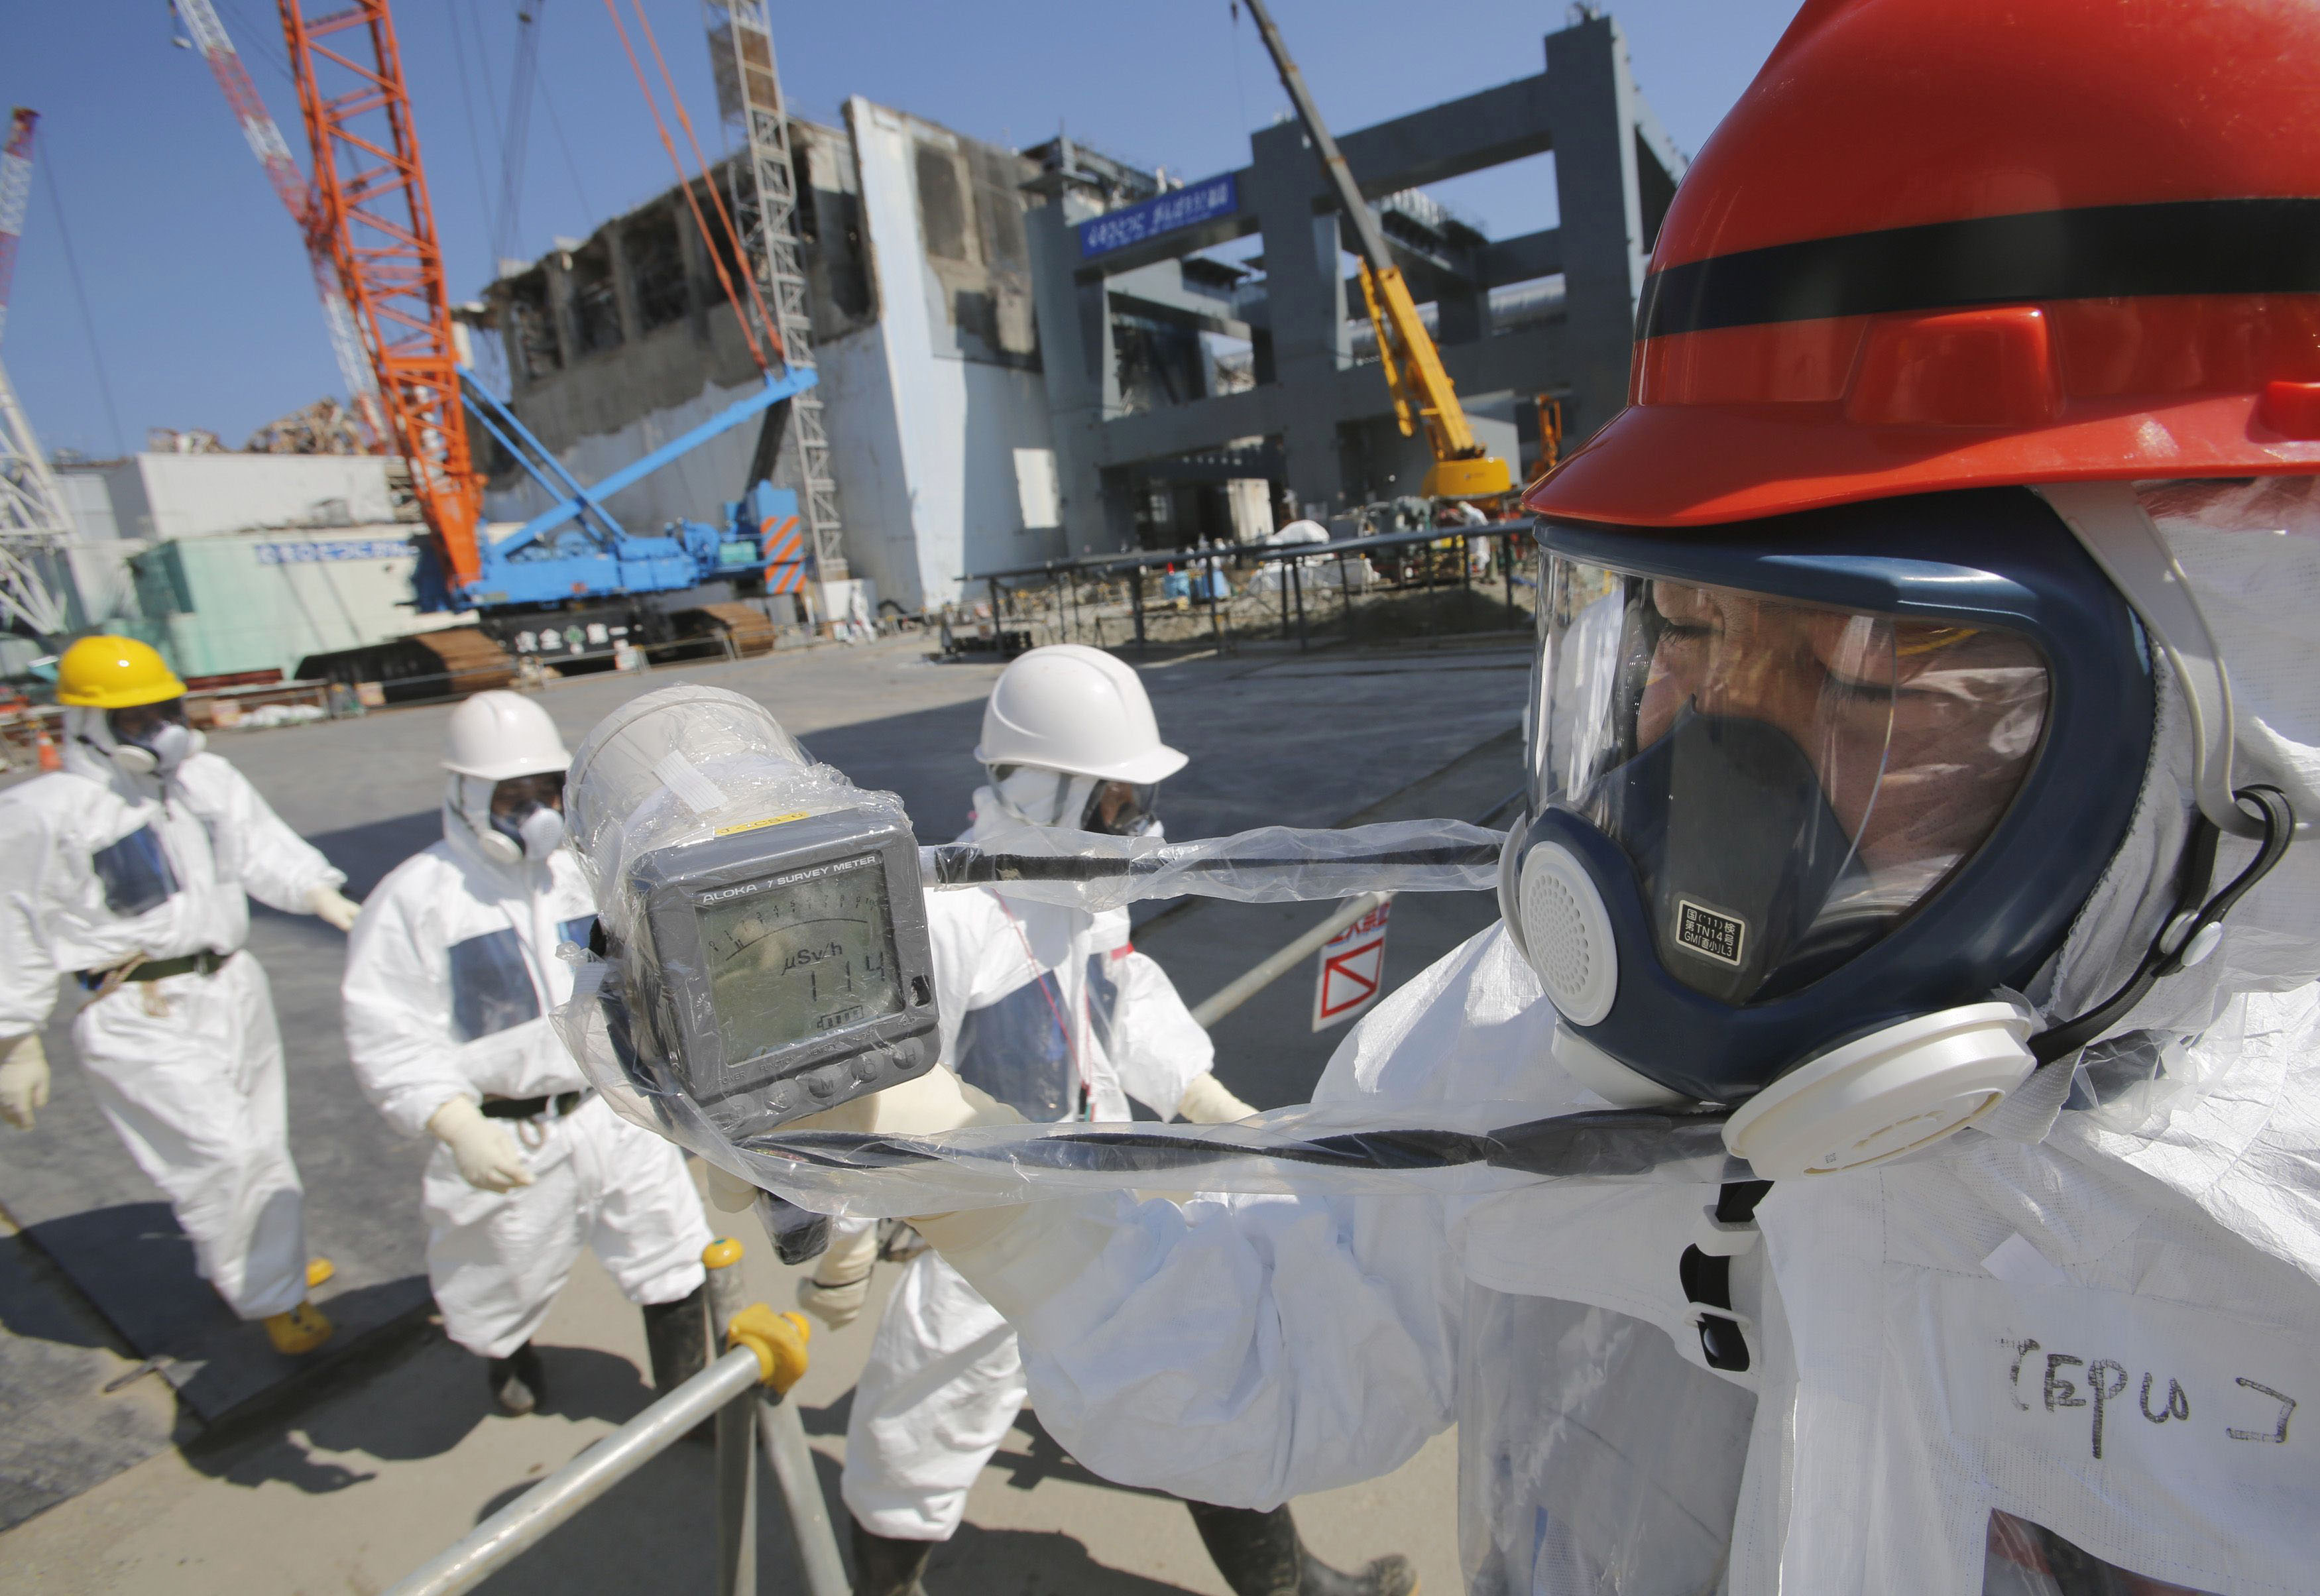 Hazard pay: A worker at the Fukushima No. 1 nuclear complex gets a radiation reading of 114 microsieverts per hour on March 6 near reactor 4, which stands surrounded by cranes next to the concrete foundations for a storage facility for melted fuel rods. | POOL